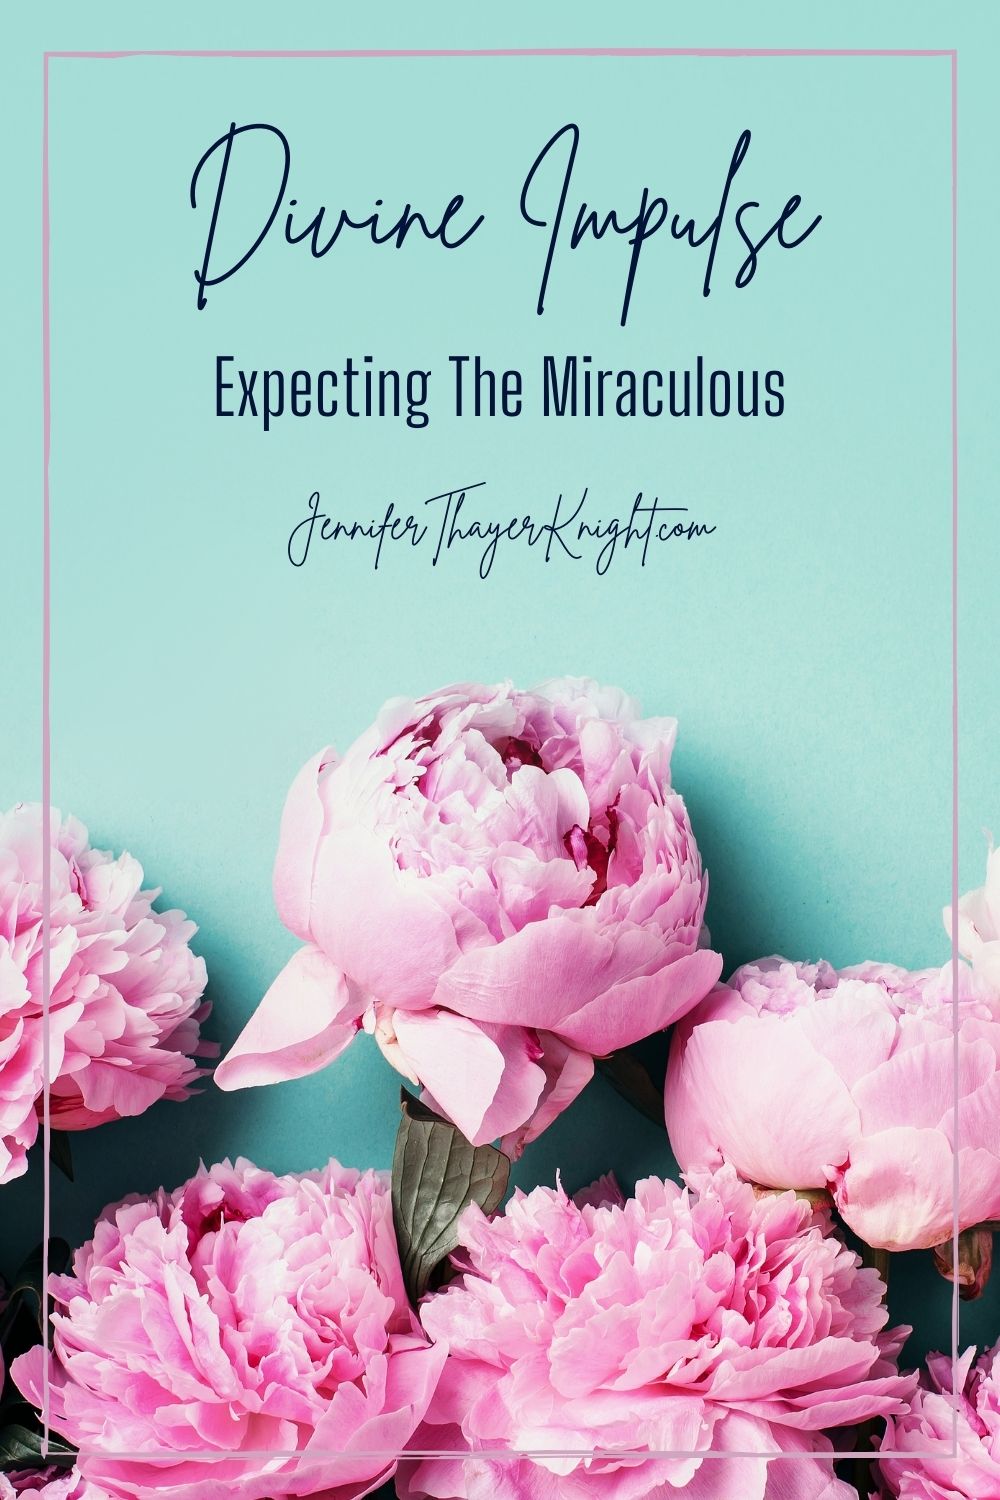 Divine Impulse - Expecting The Miraculous - Blog Title Image